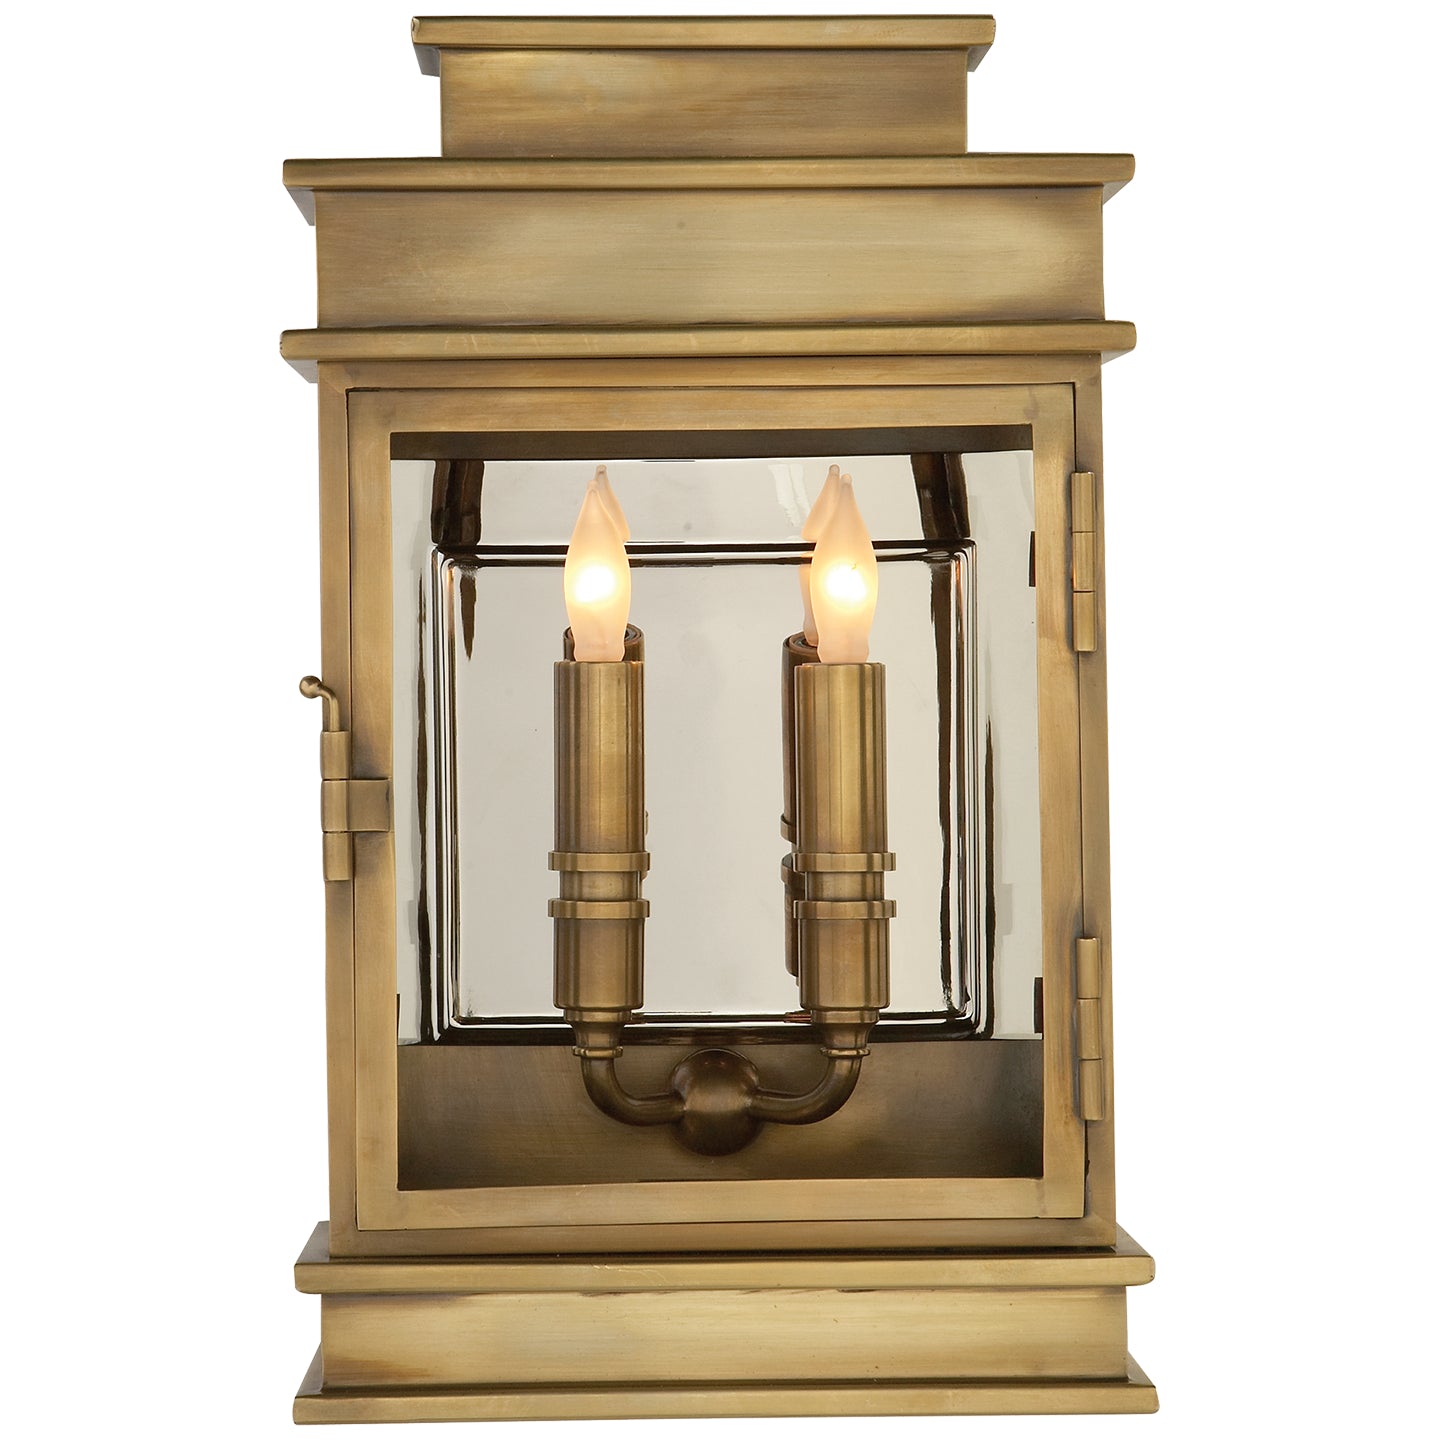 Visual Comfort Signature Canada - Two Light Wall Sconce - Linear Lantern - Antique-Burnished Brass- Union Lighting Luminaires Decor